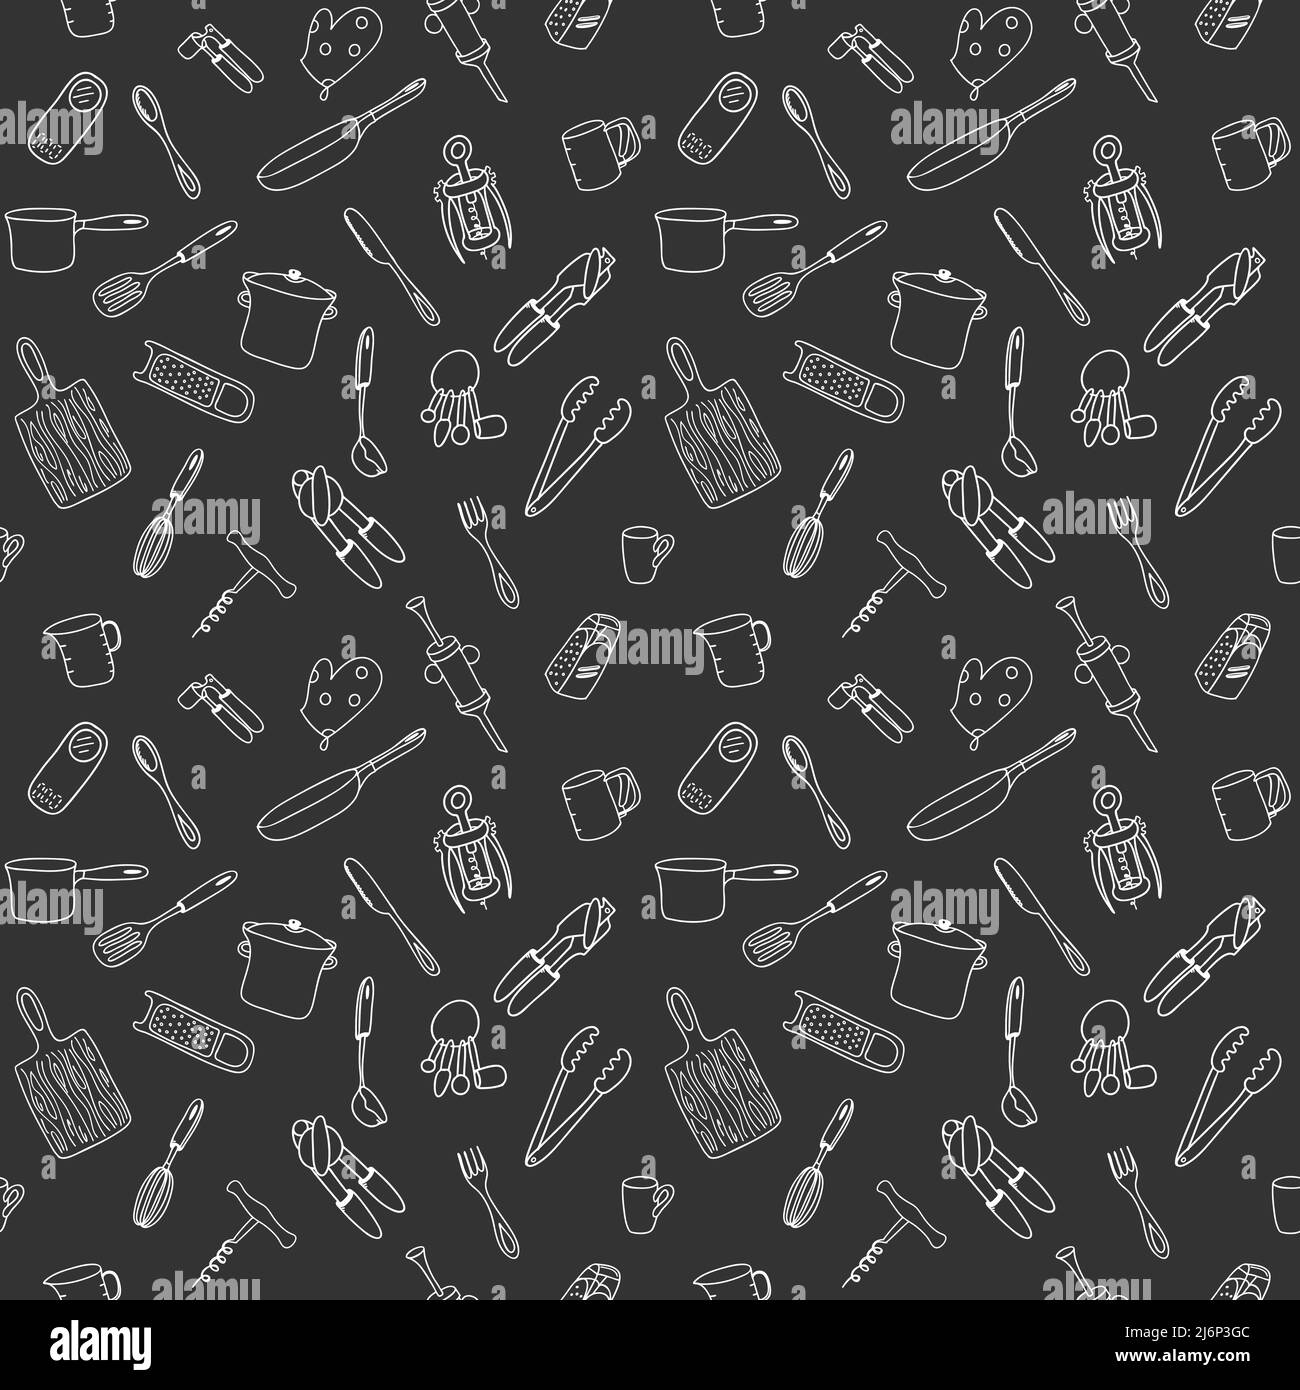 Seamless pattern with elements of kitchen utensils, utensils and appliances. Black-white background for menu design,brochures, web pages.Doodle illust Stock Vector